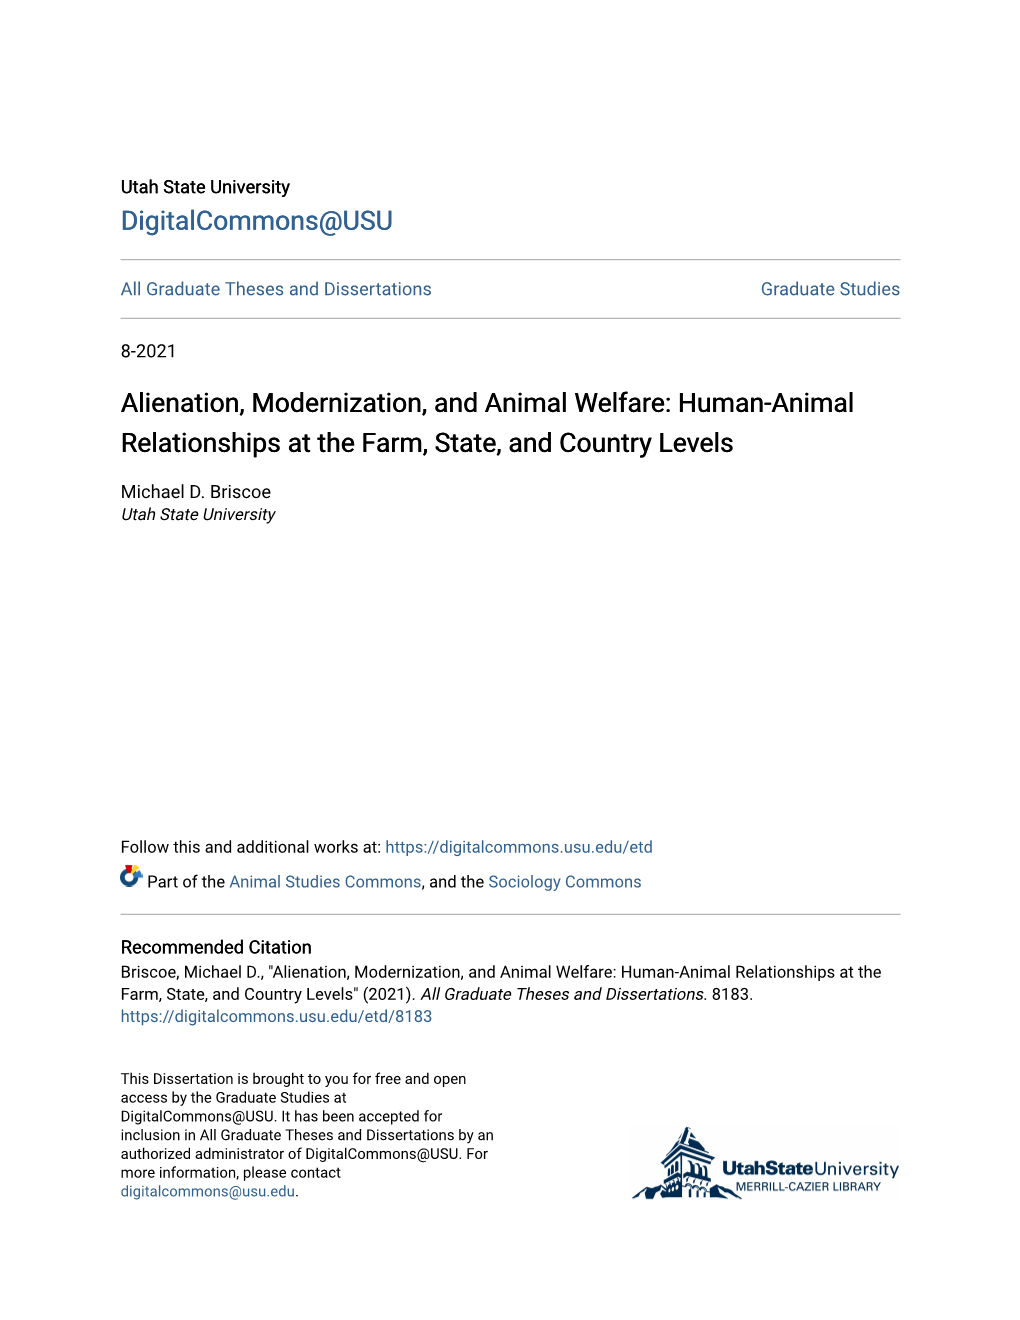 Alienation, Modernization, and Animal Welfare: Human-Animal Relationships at the Farm, State, and Country Levels